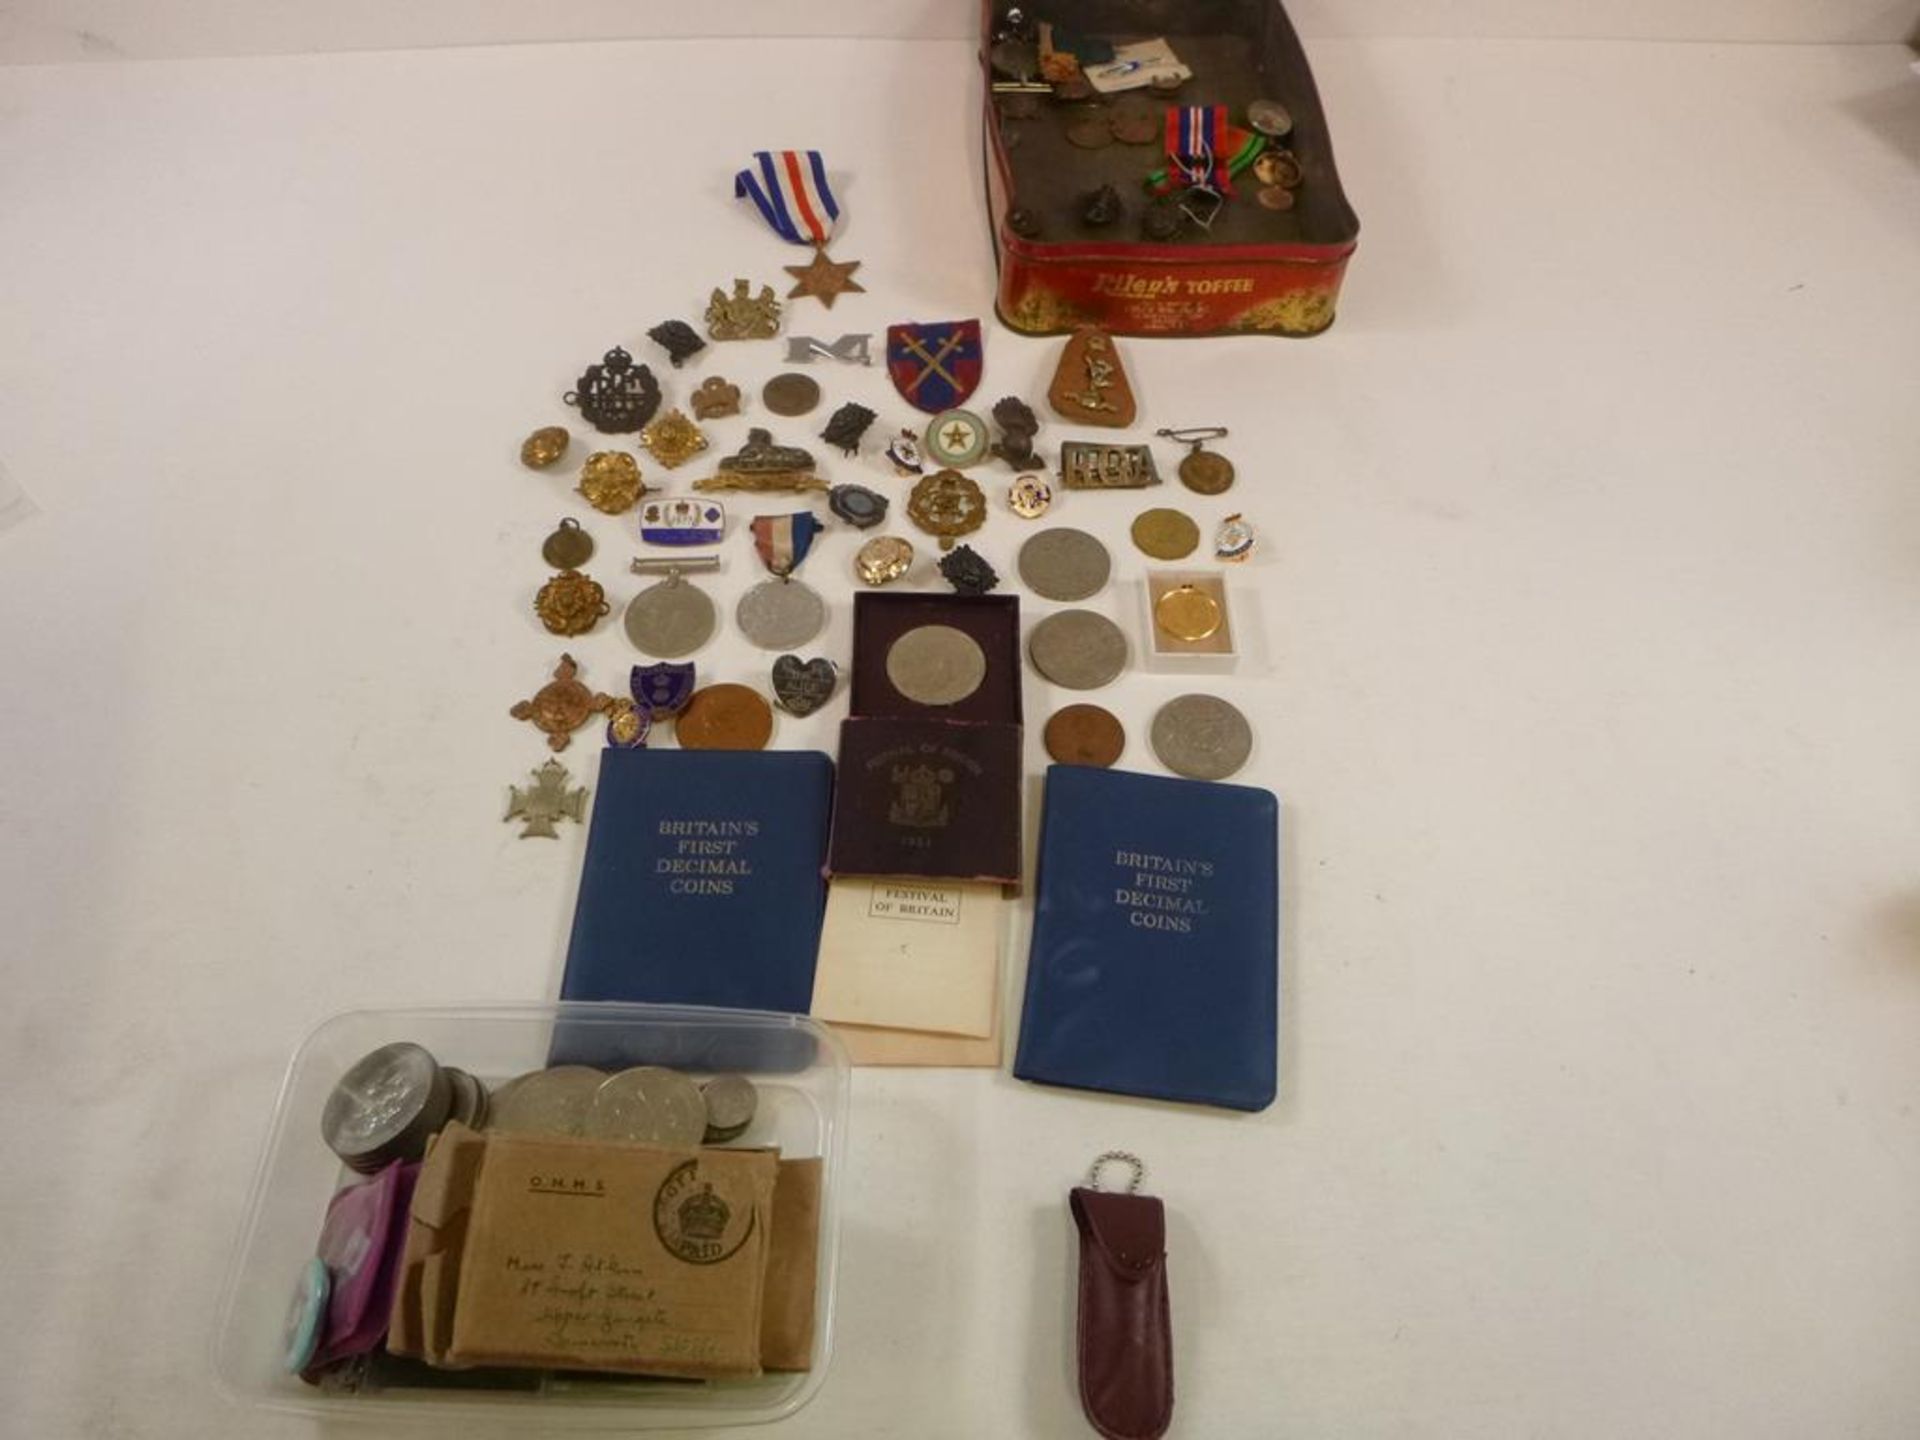 An interesting collection of Military Medals, Enamel Badges, Military Coins etc (est. £50-£100)